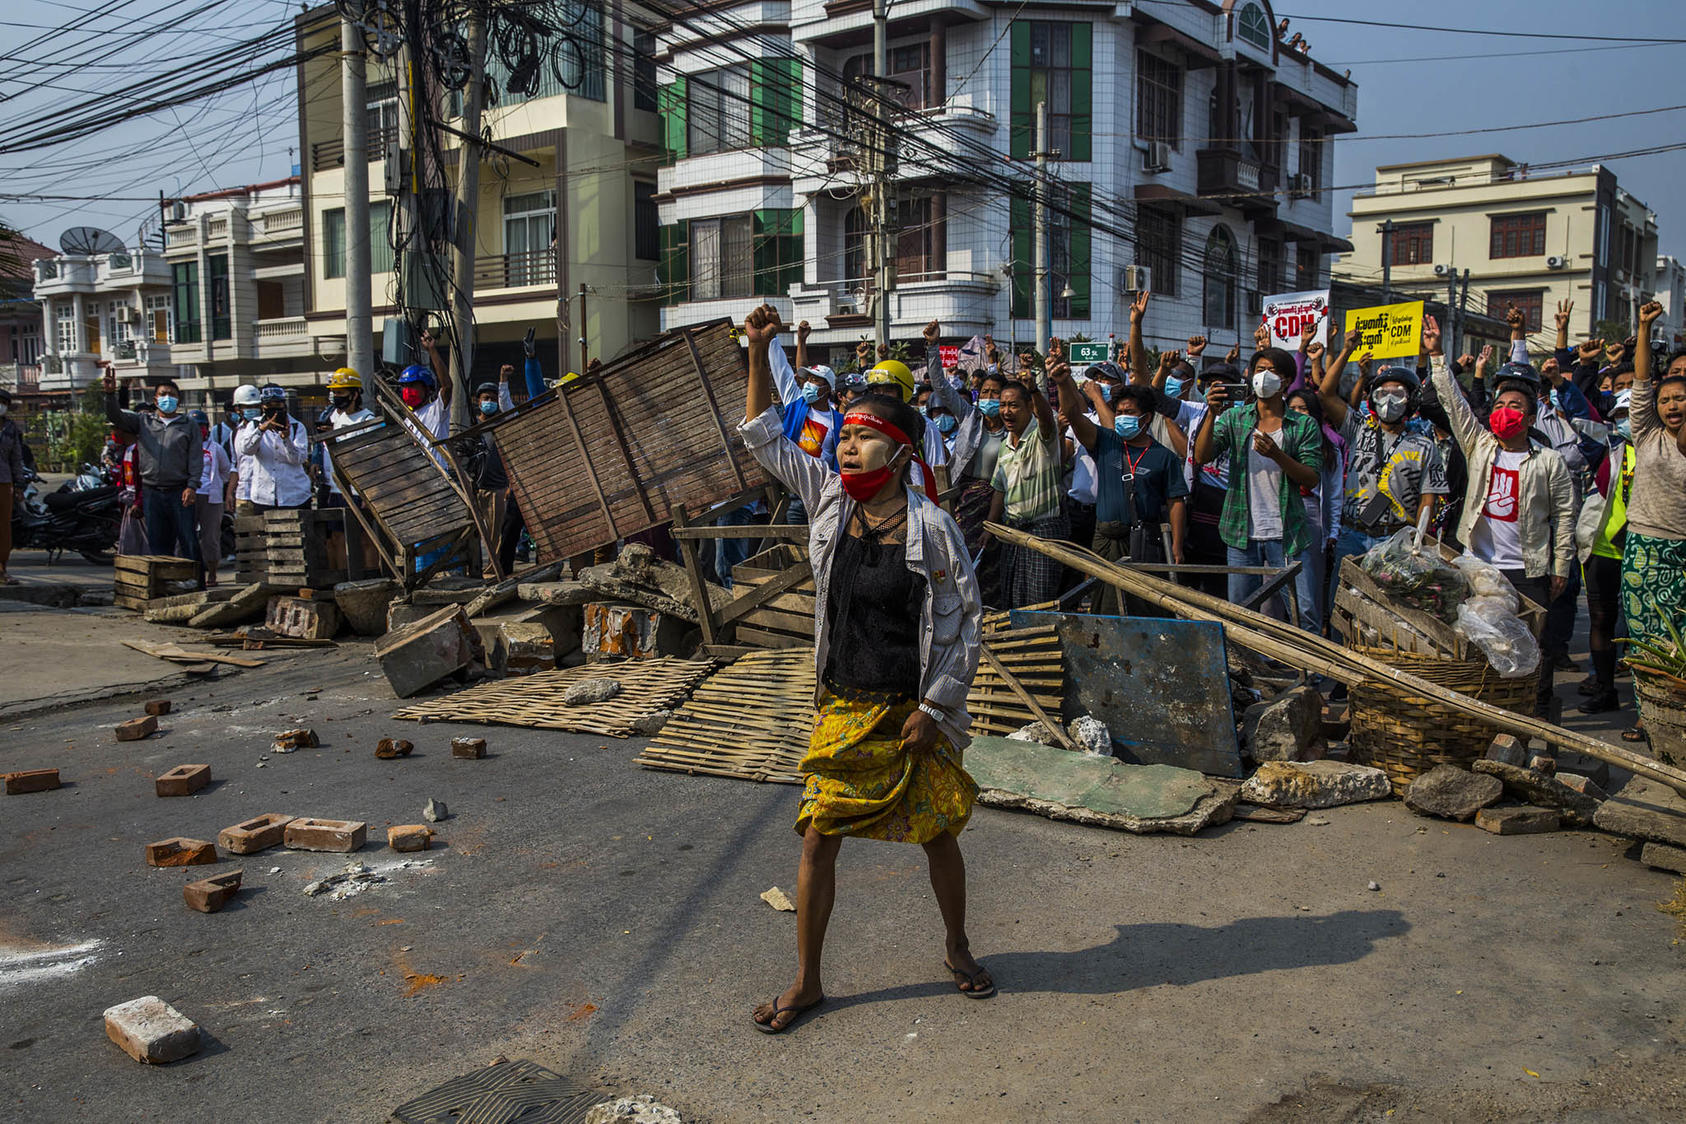 Protesters shout from behind a makeshift barricade in Mandalay, Myanmar, as police and military forces crack down on protests against the military coup. February 28, 2021. (The New York Times)